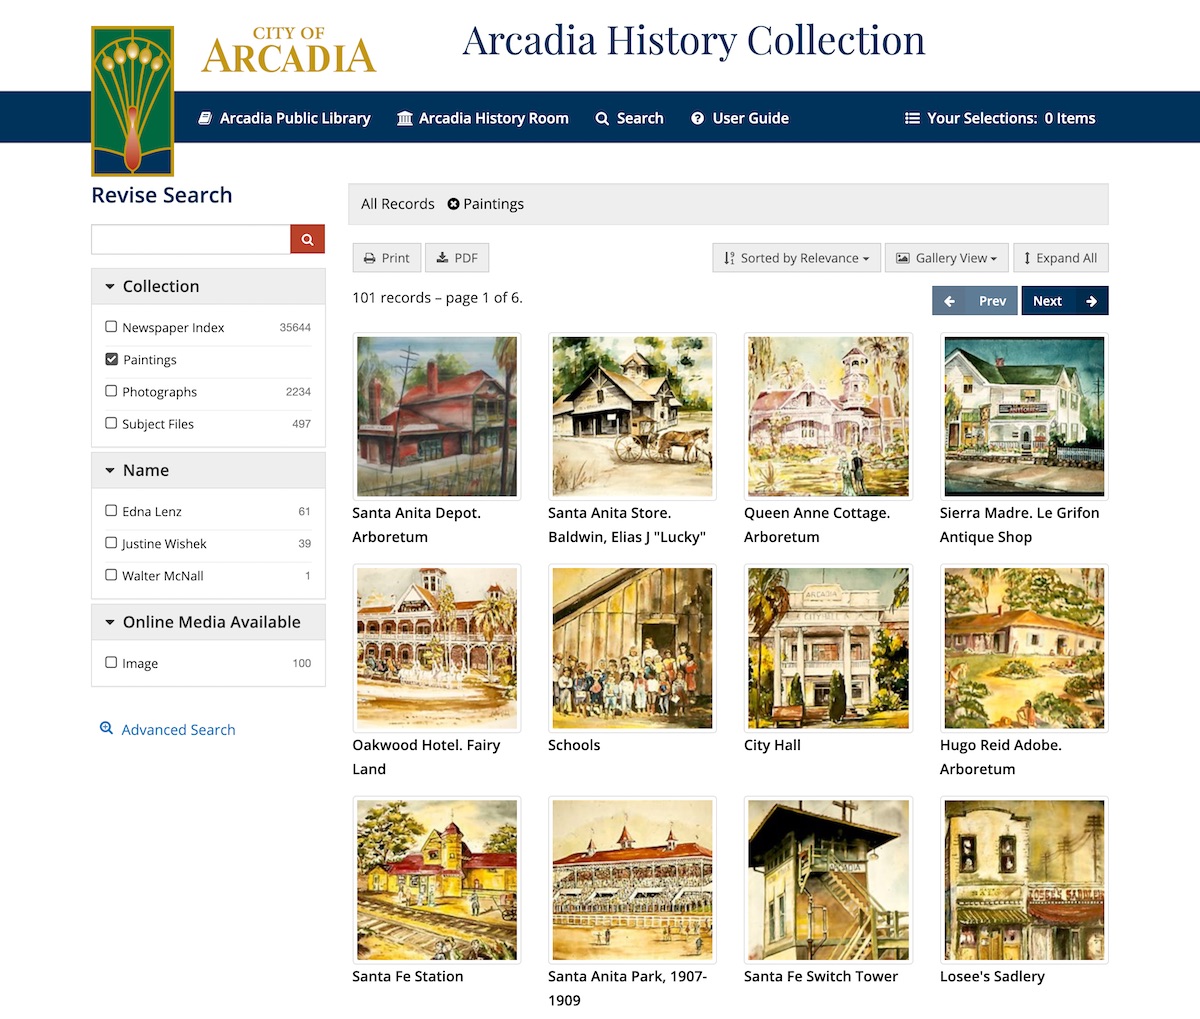 Arcadia Public Library History Collection